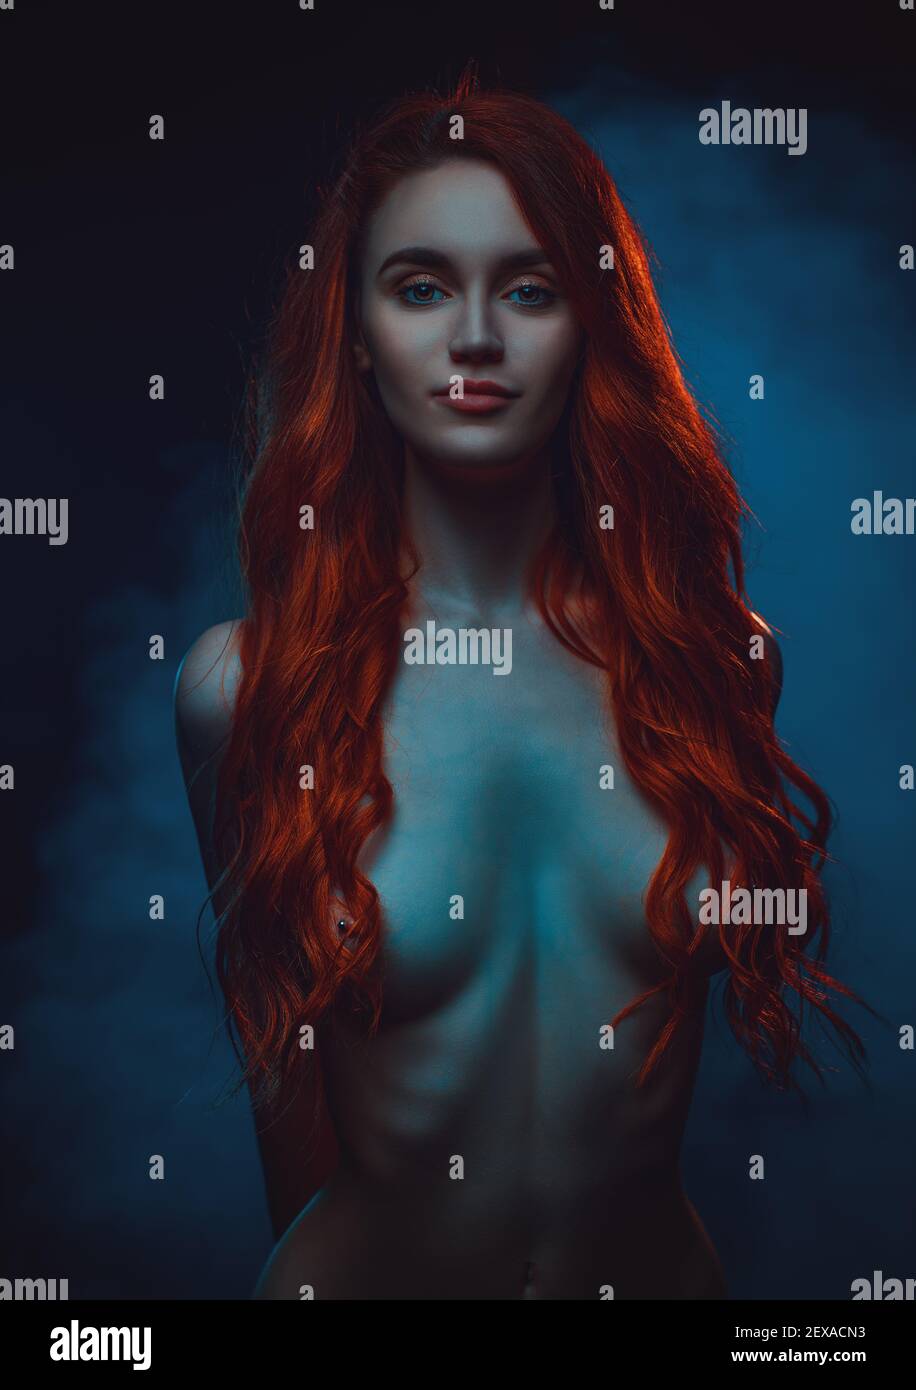 Young slim nude woman with red hair portrait in dark colors with smoke Stock Photo